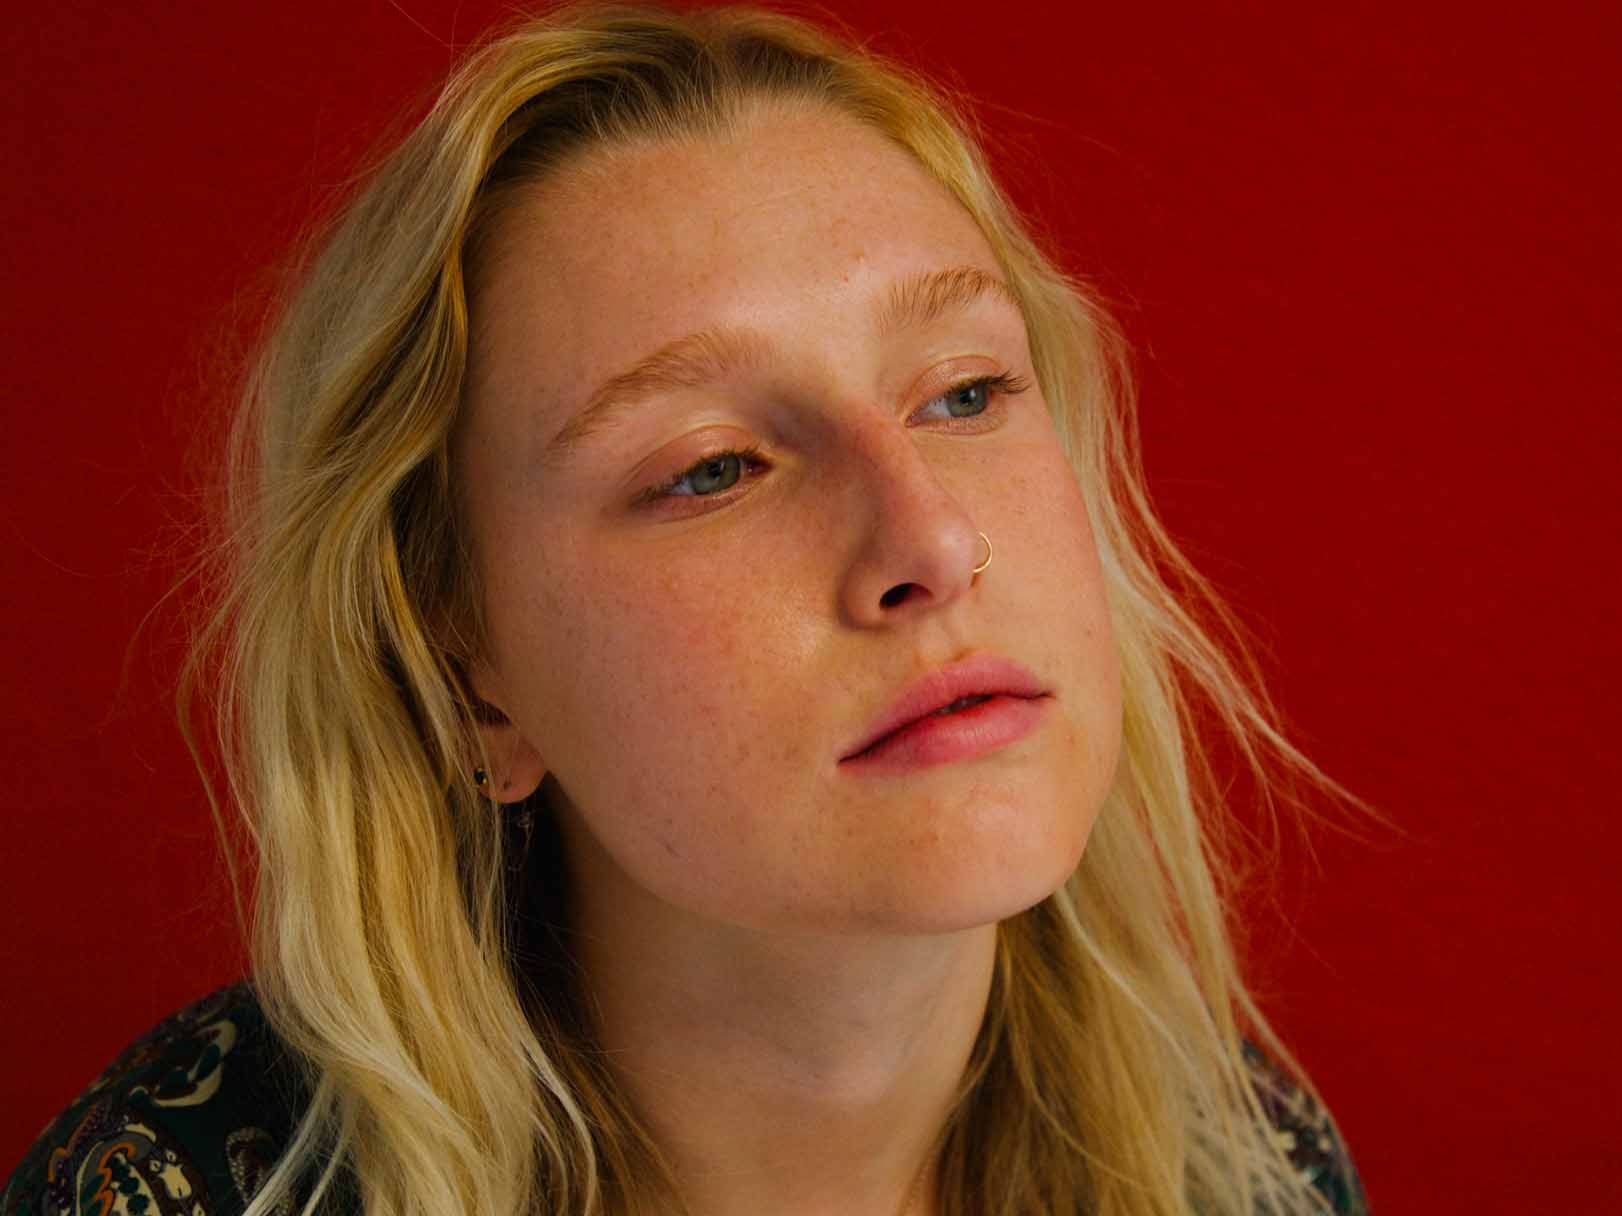 Billie Marten is newly liberated on ‘Flora Fauna’